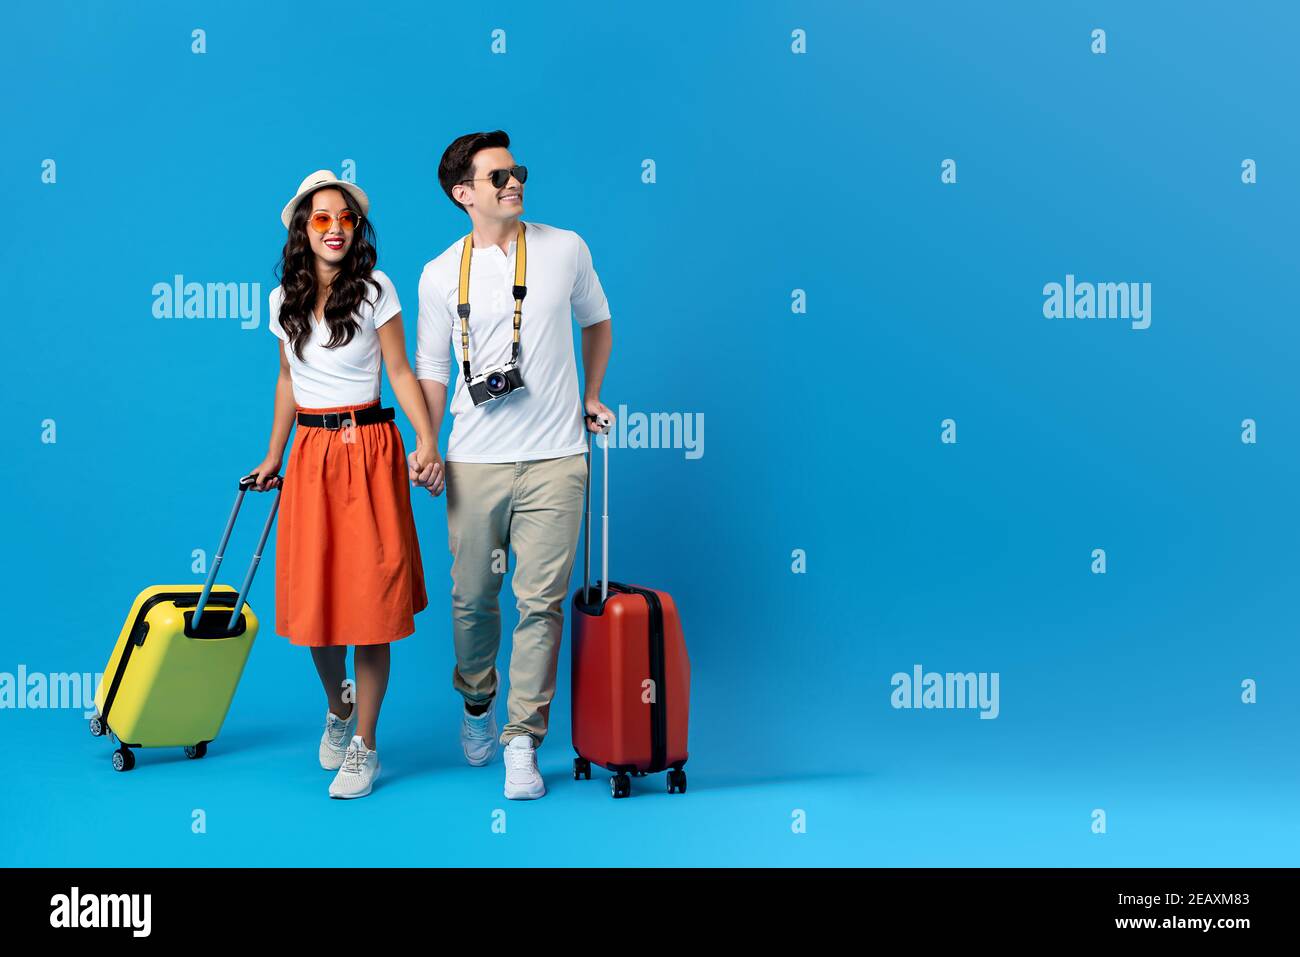 Happy young couple being ready to go for their holidays with colorful suitcases isolated on blue background with copy space Stock Photo